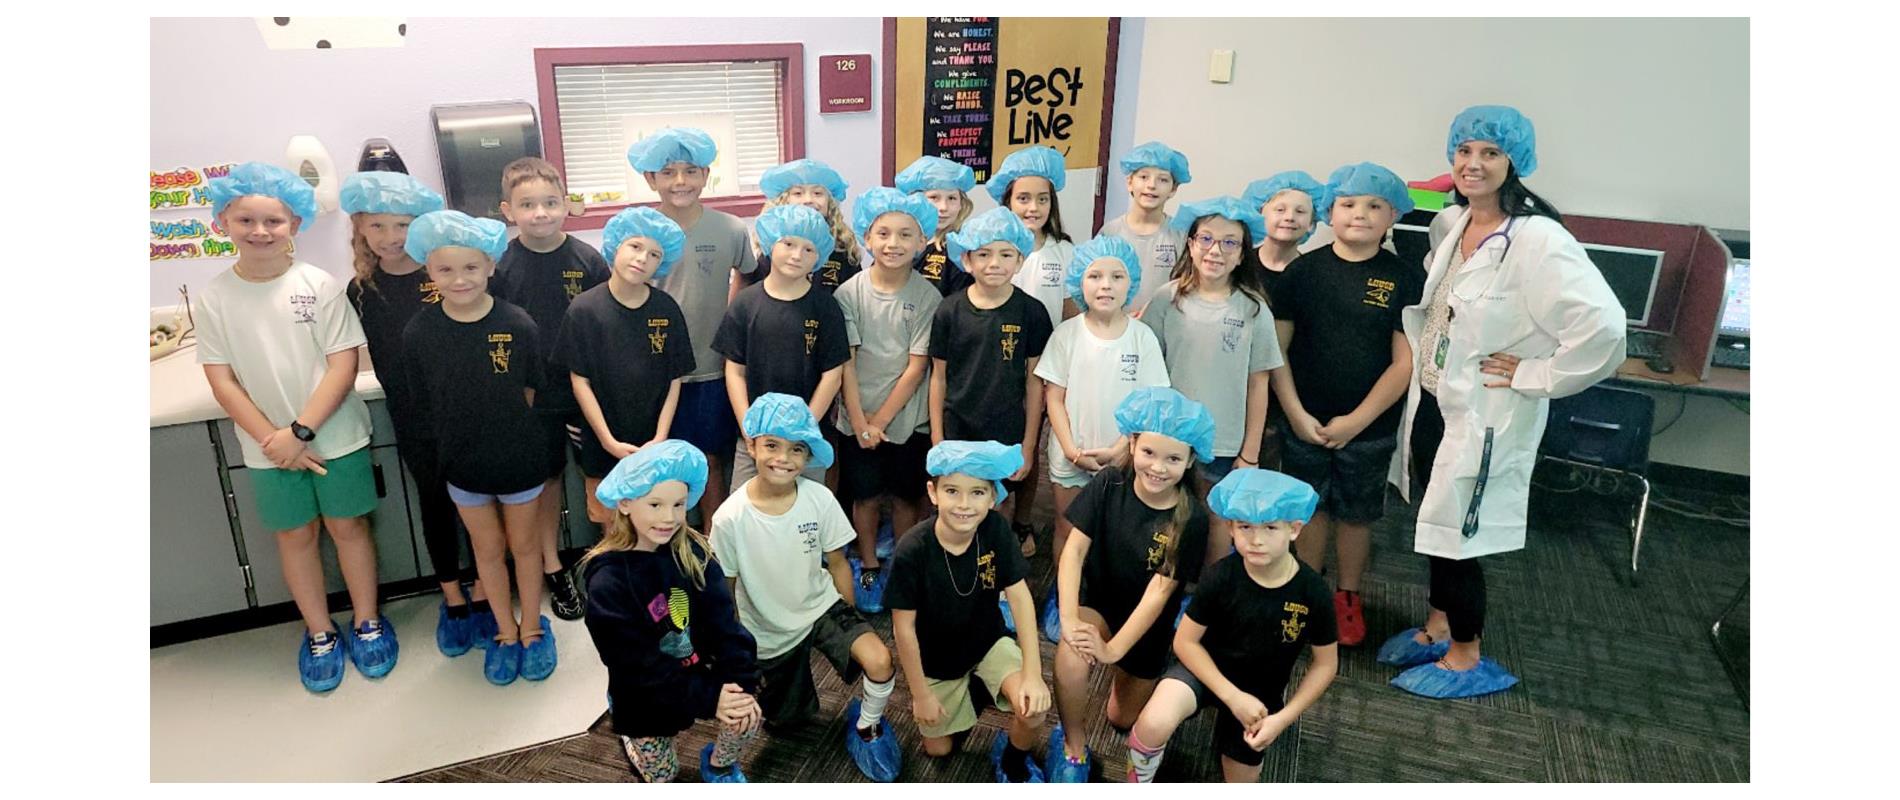 Mrs. Hammer's class dresses as doctors while studying the human body